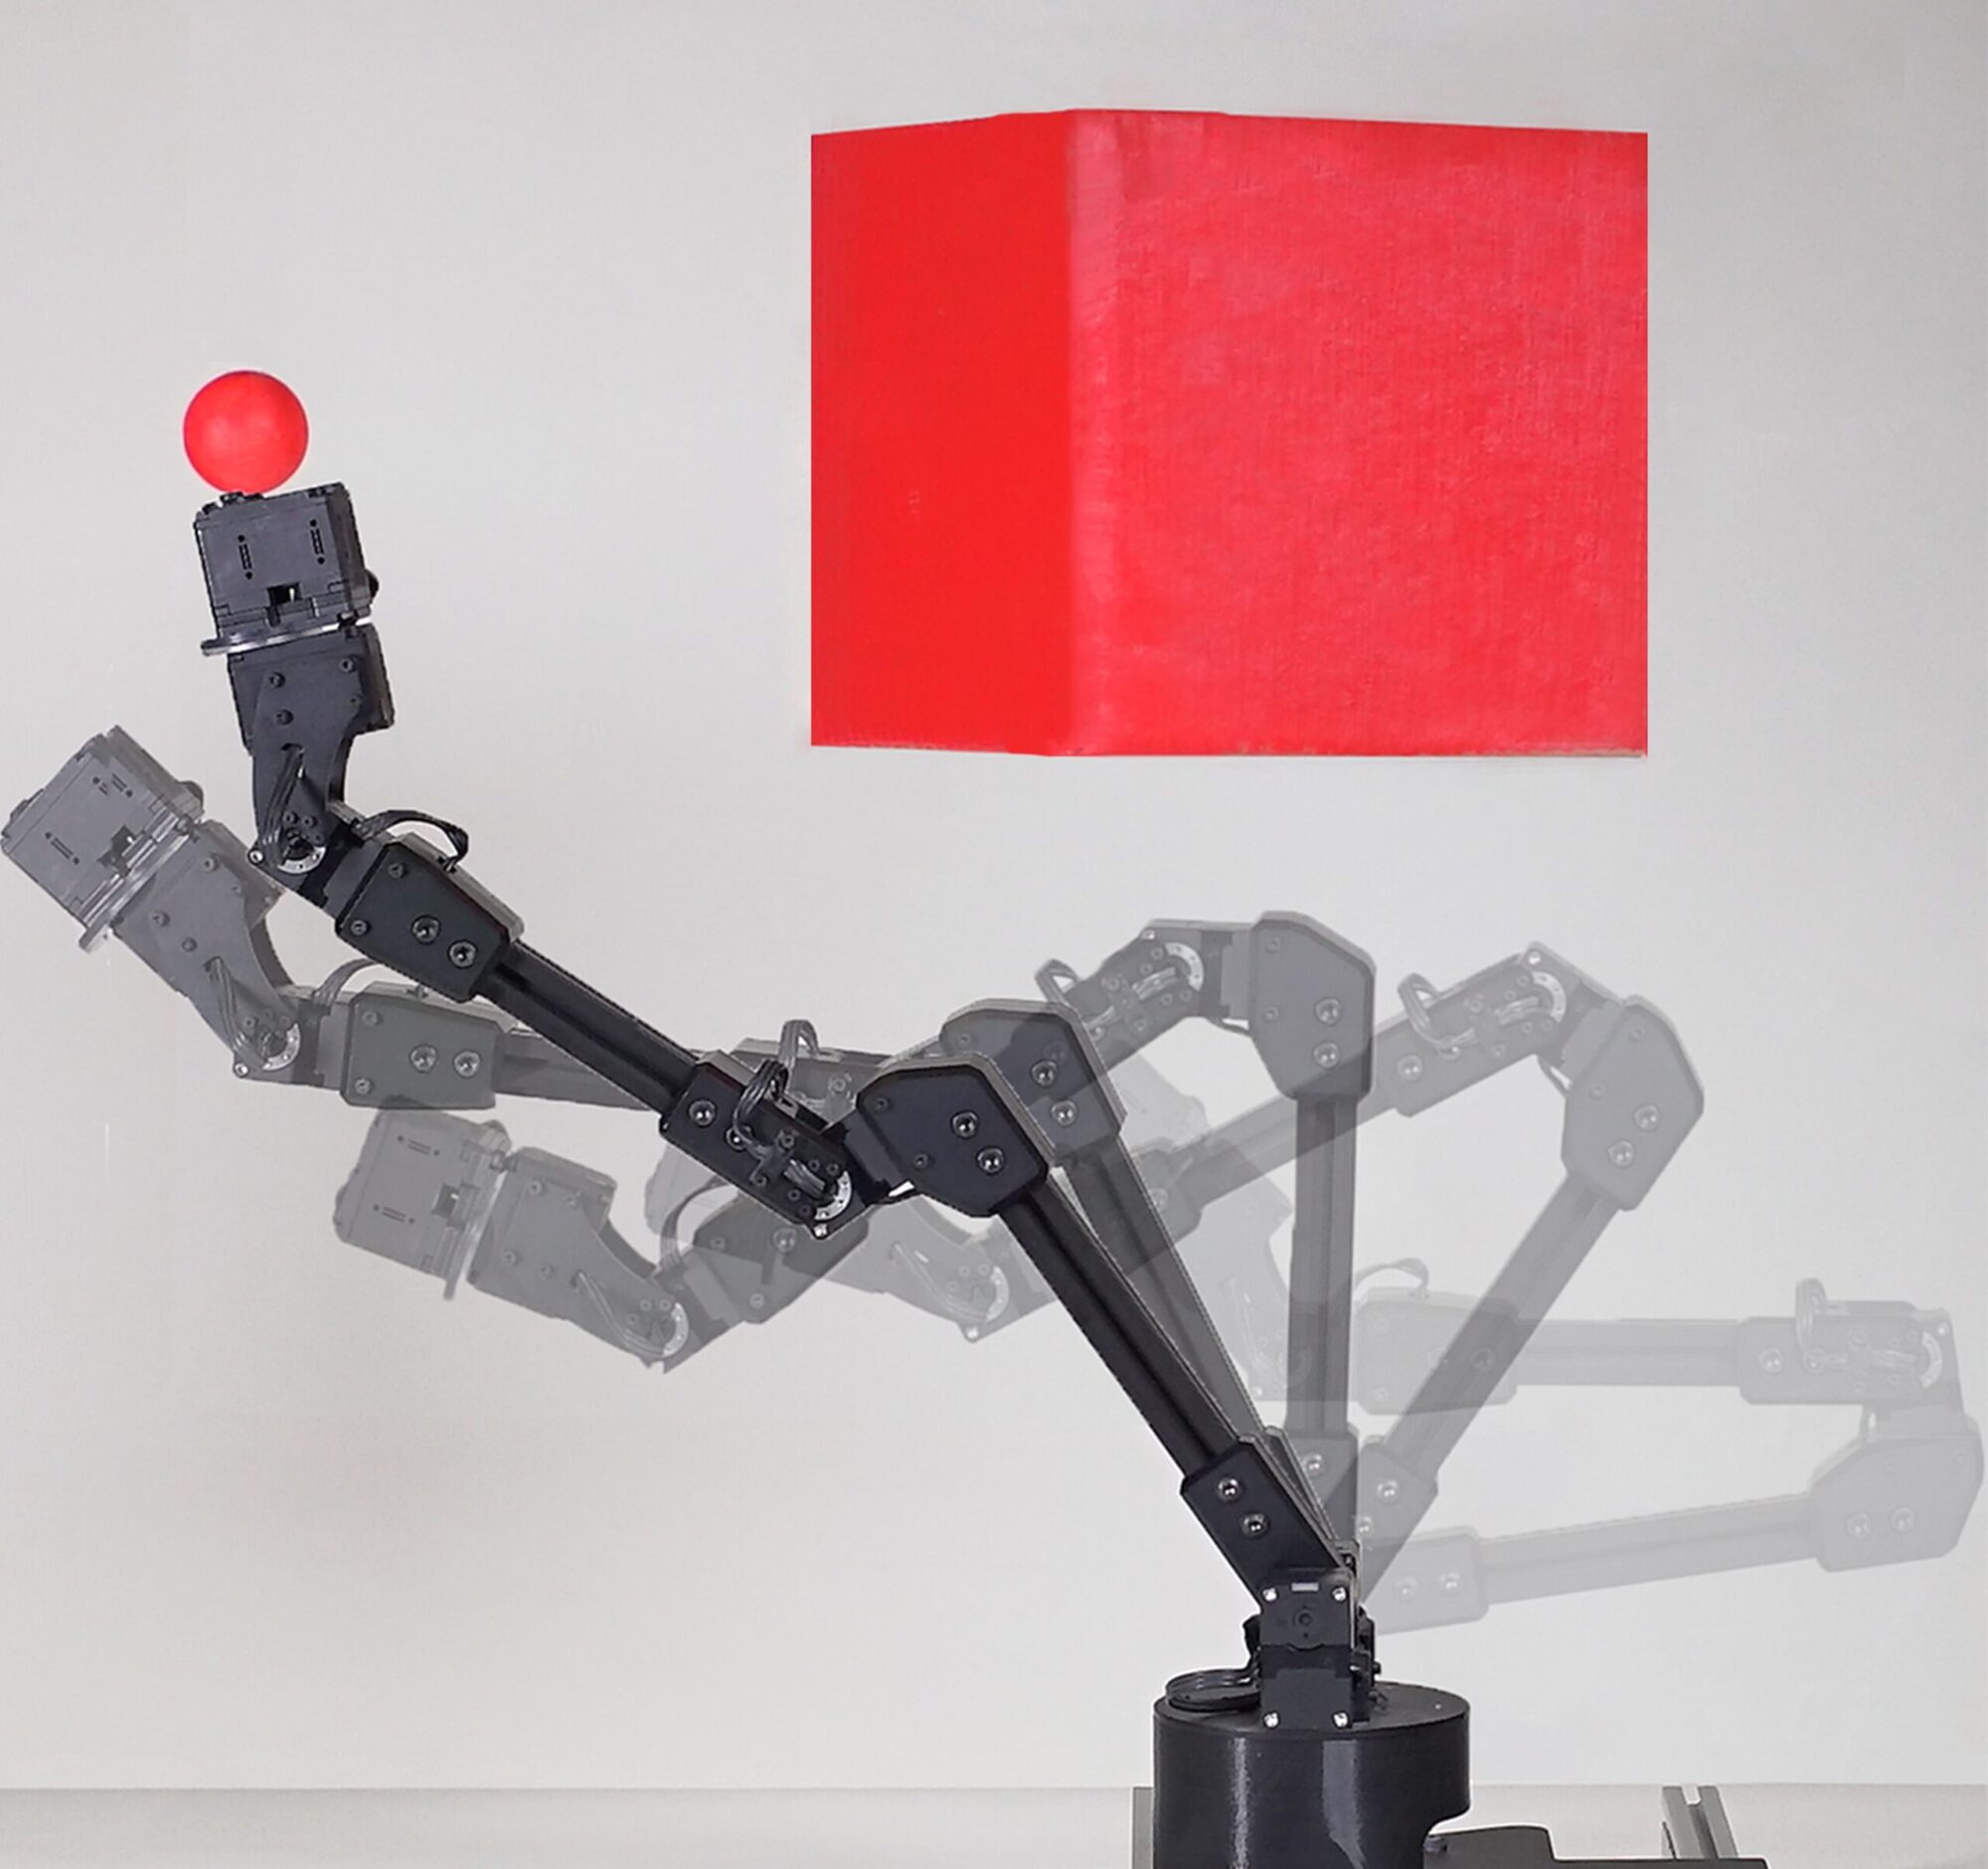 A self-aware robot taught itself how to use its body